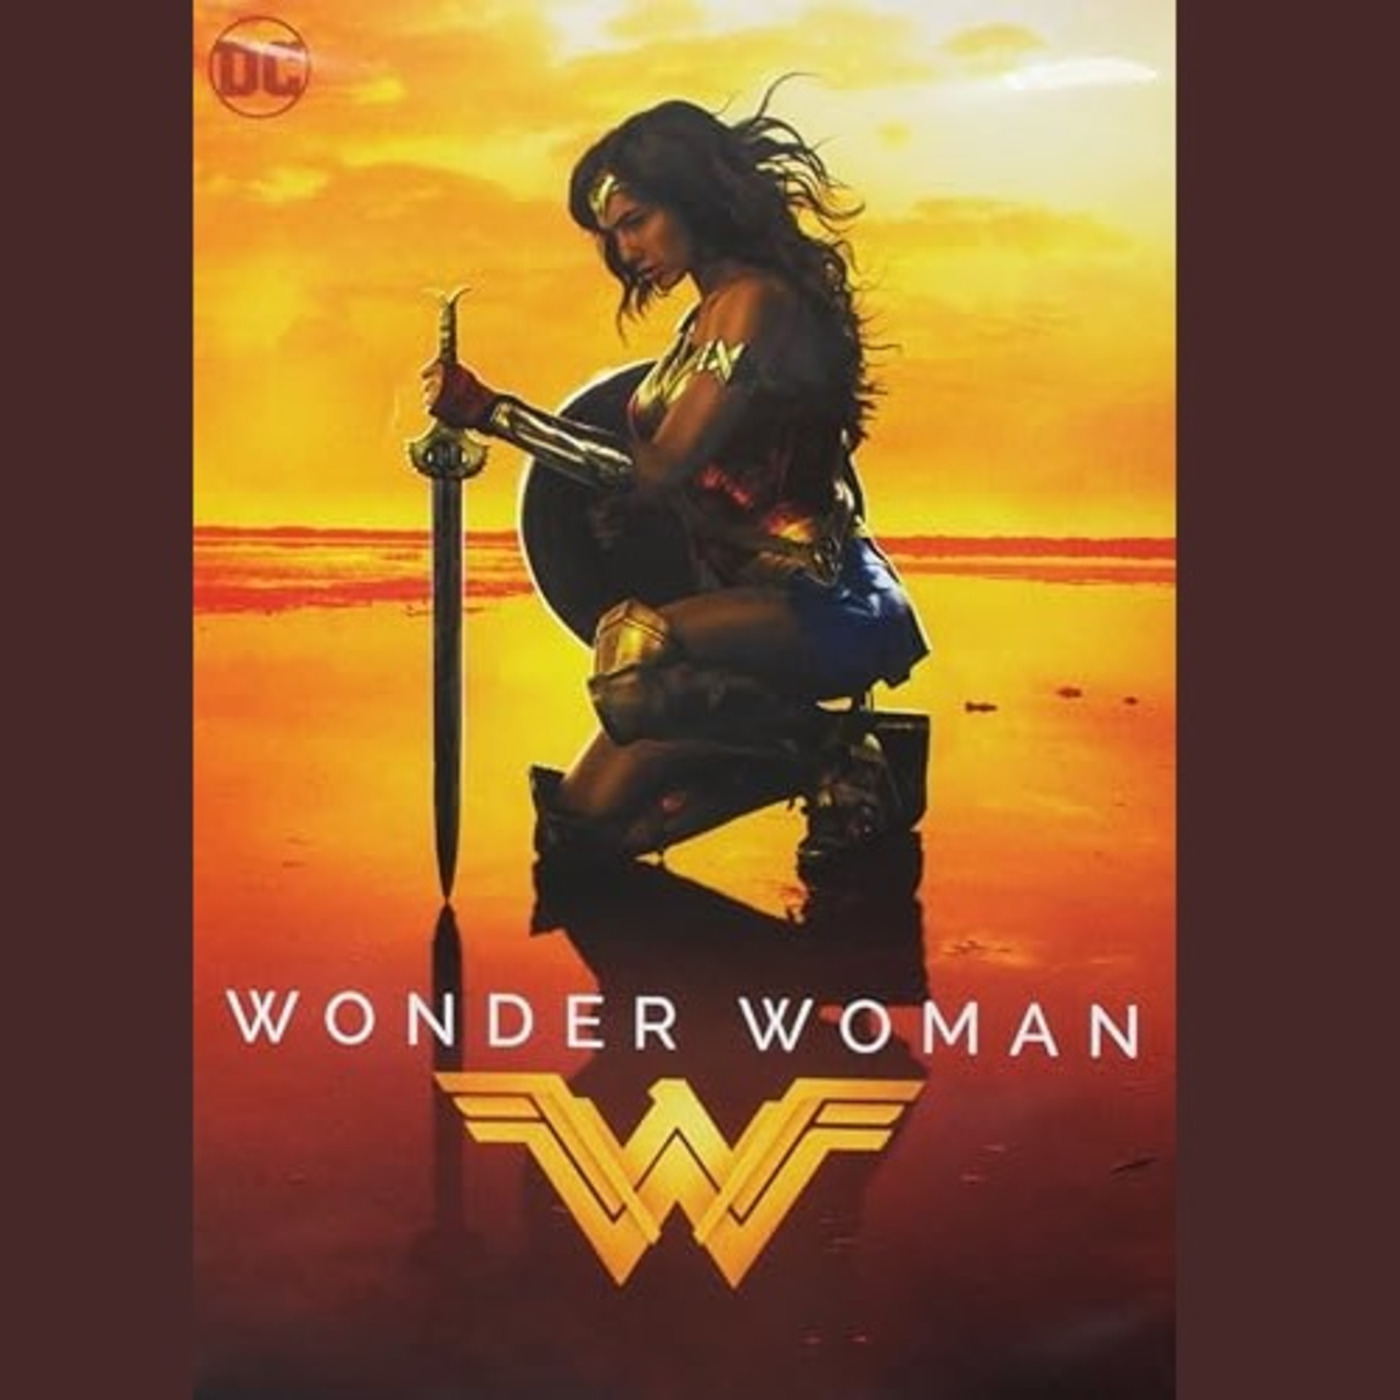 Episode 178: [REBROADCAST] Wonder Woman audio commentary